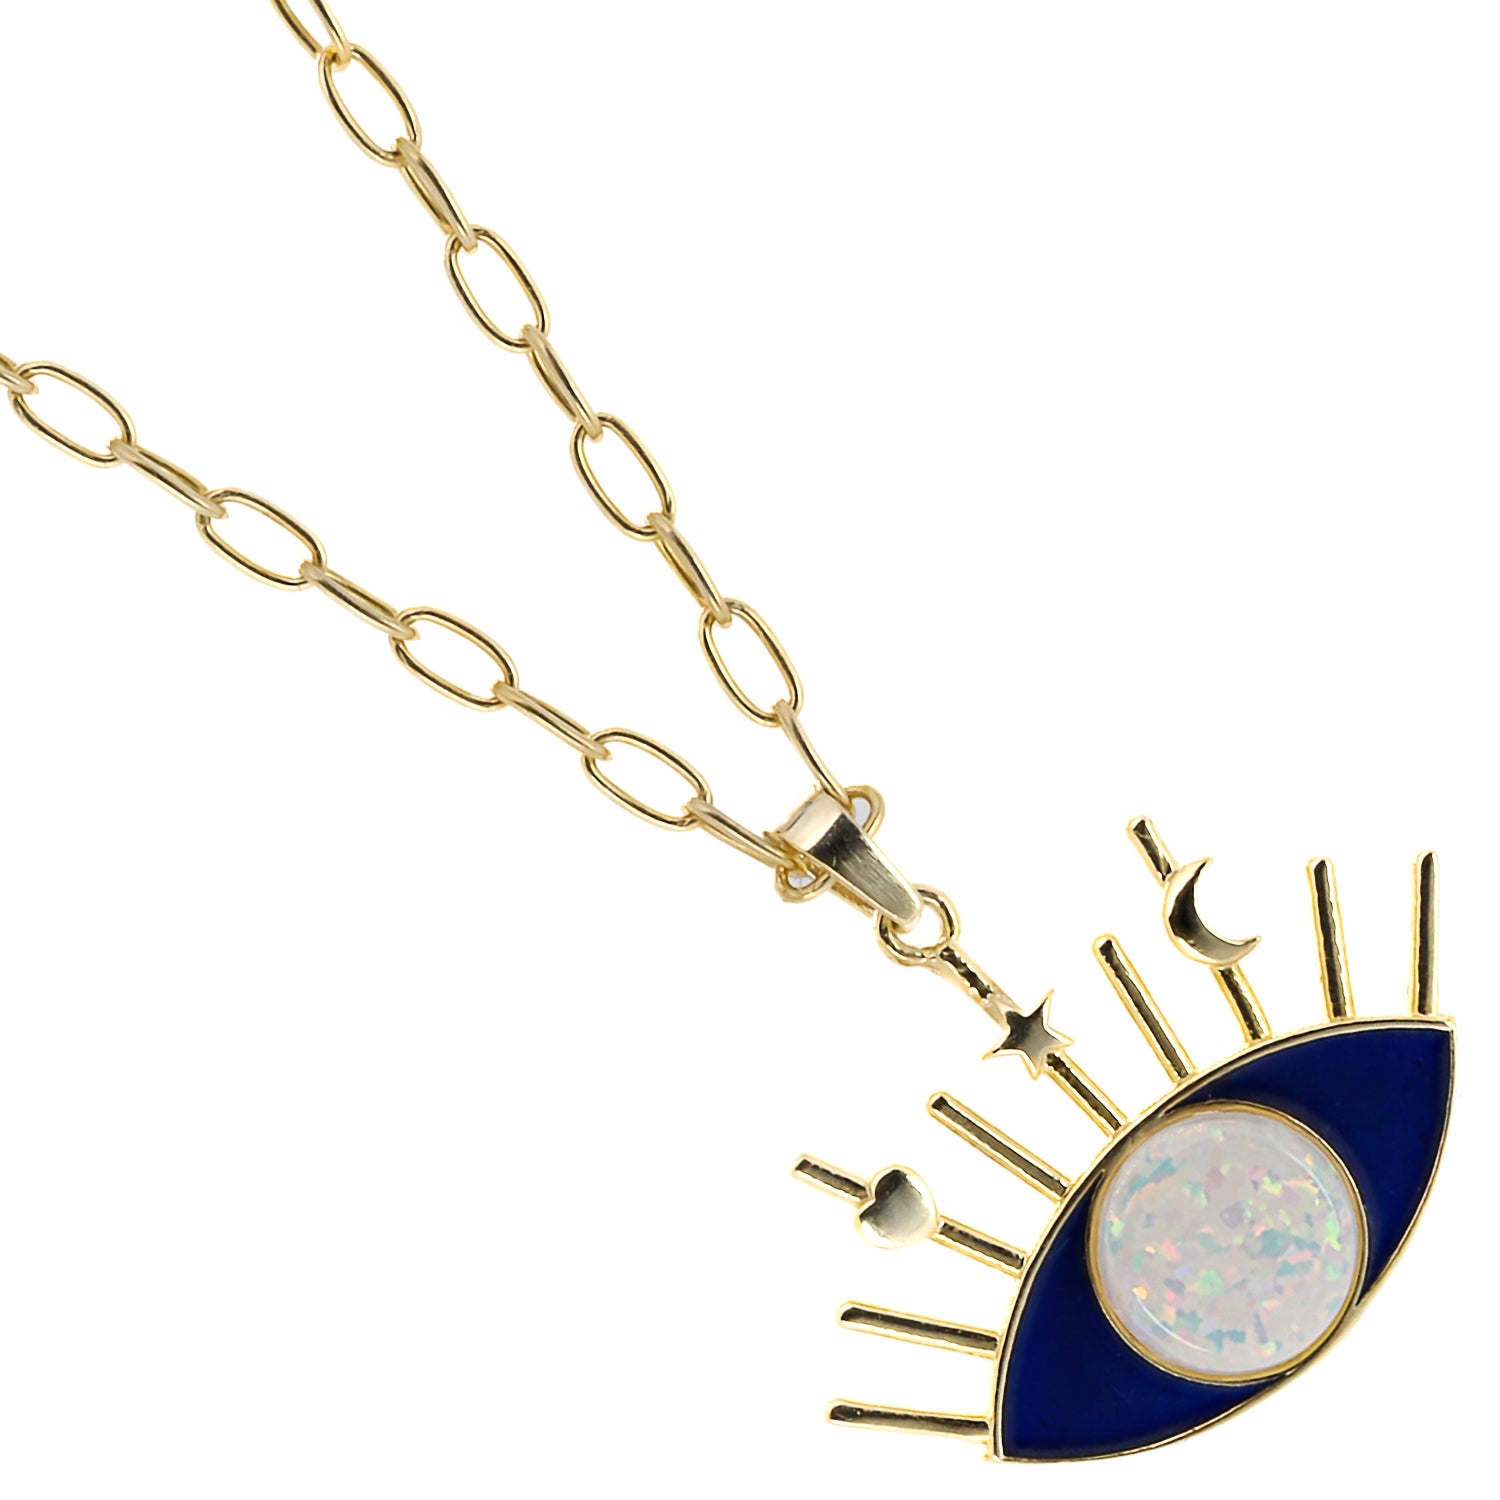 The striking contrast between the blue enamel and white opal on the Evil Eye pendant.